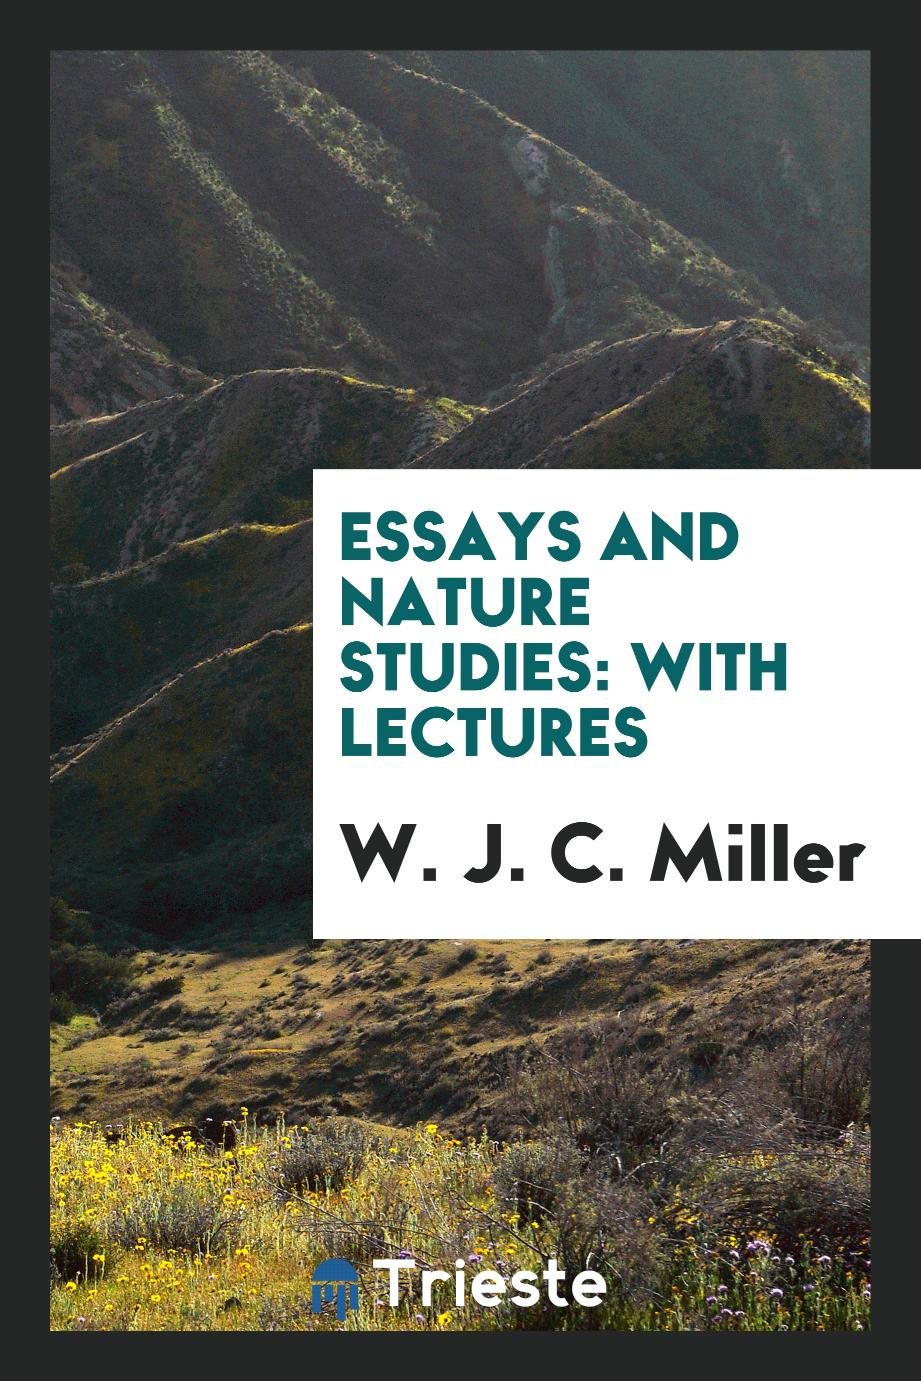 W. J. C. Miller - Essays and Nature Studies: With Lectures